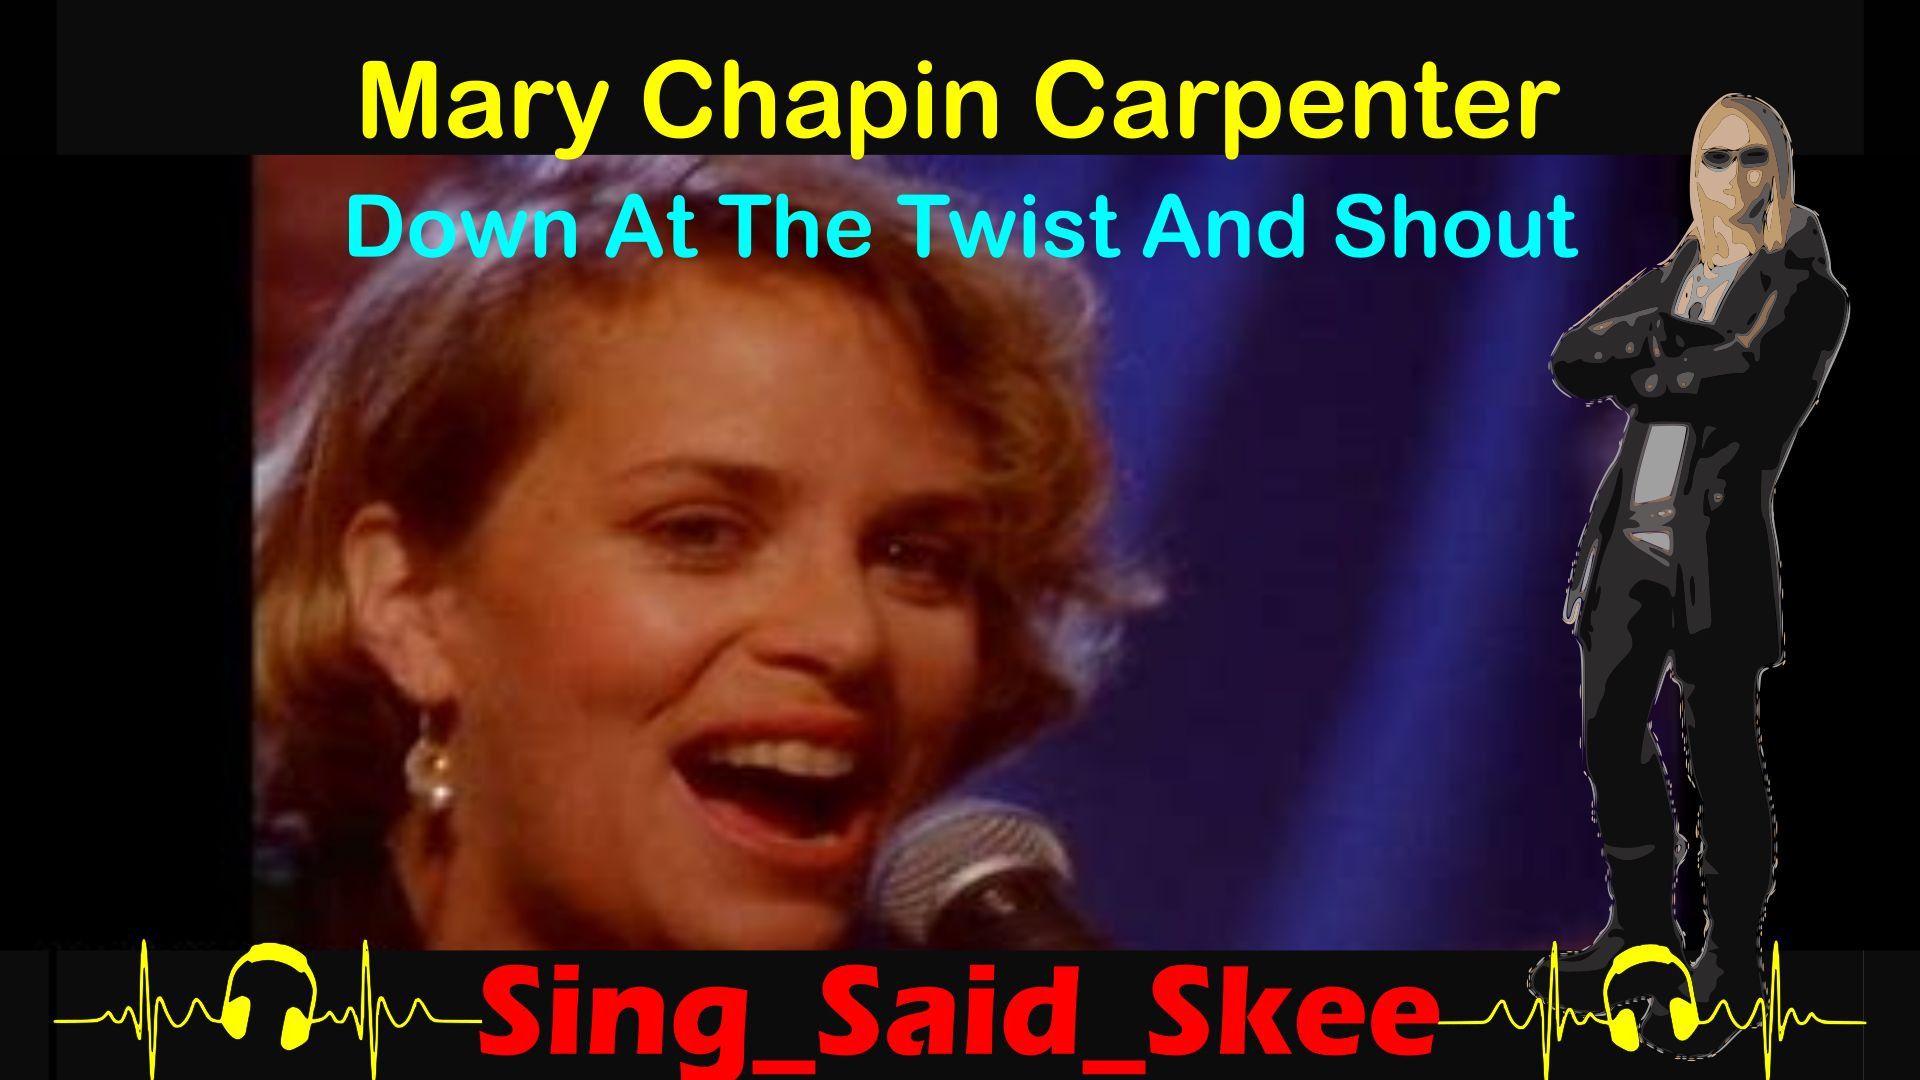 Down At The Twist And Shout - Mary Chapin Carpenter - Sing_Said_Skee